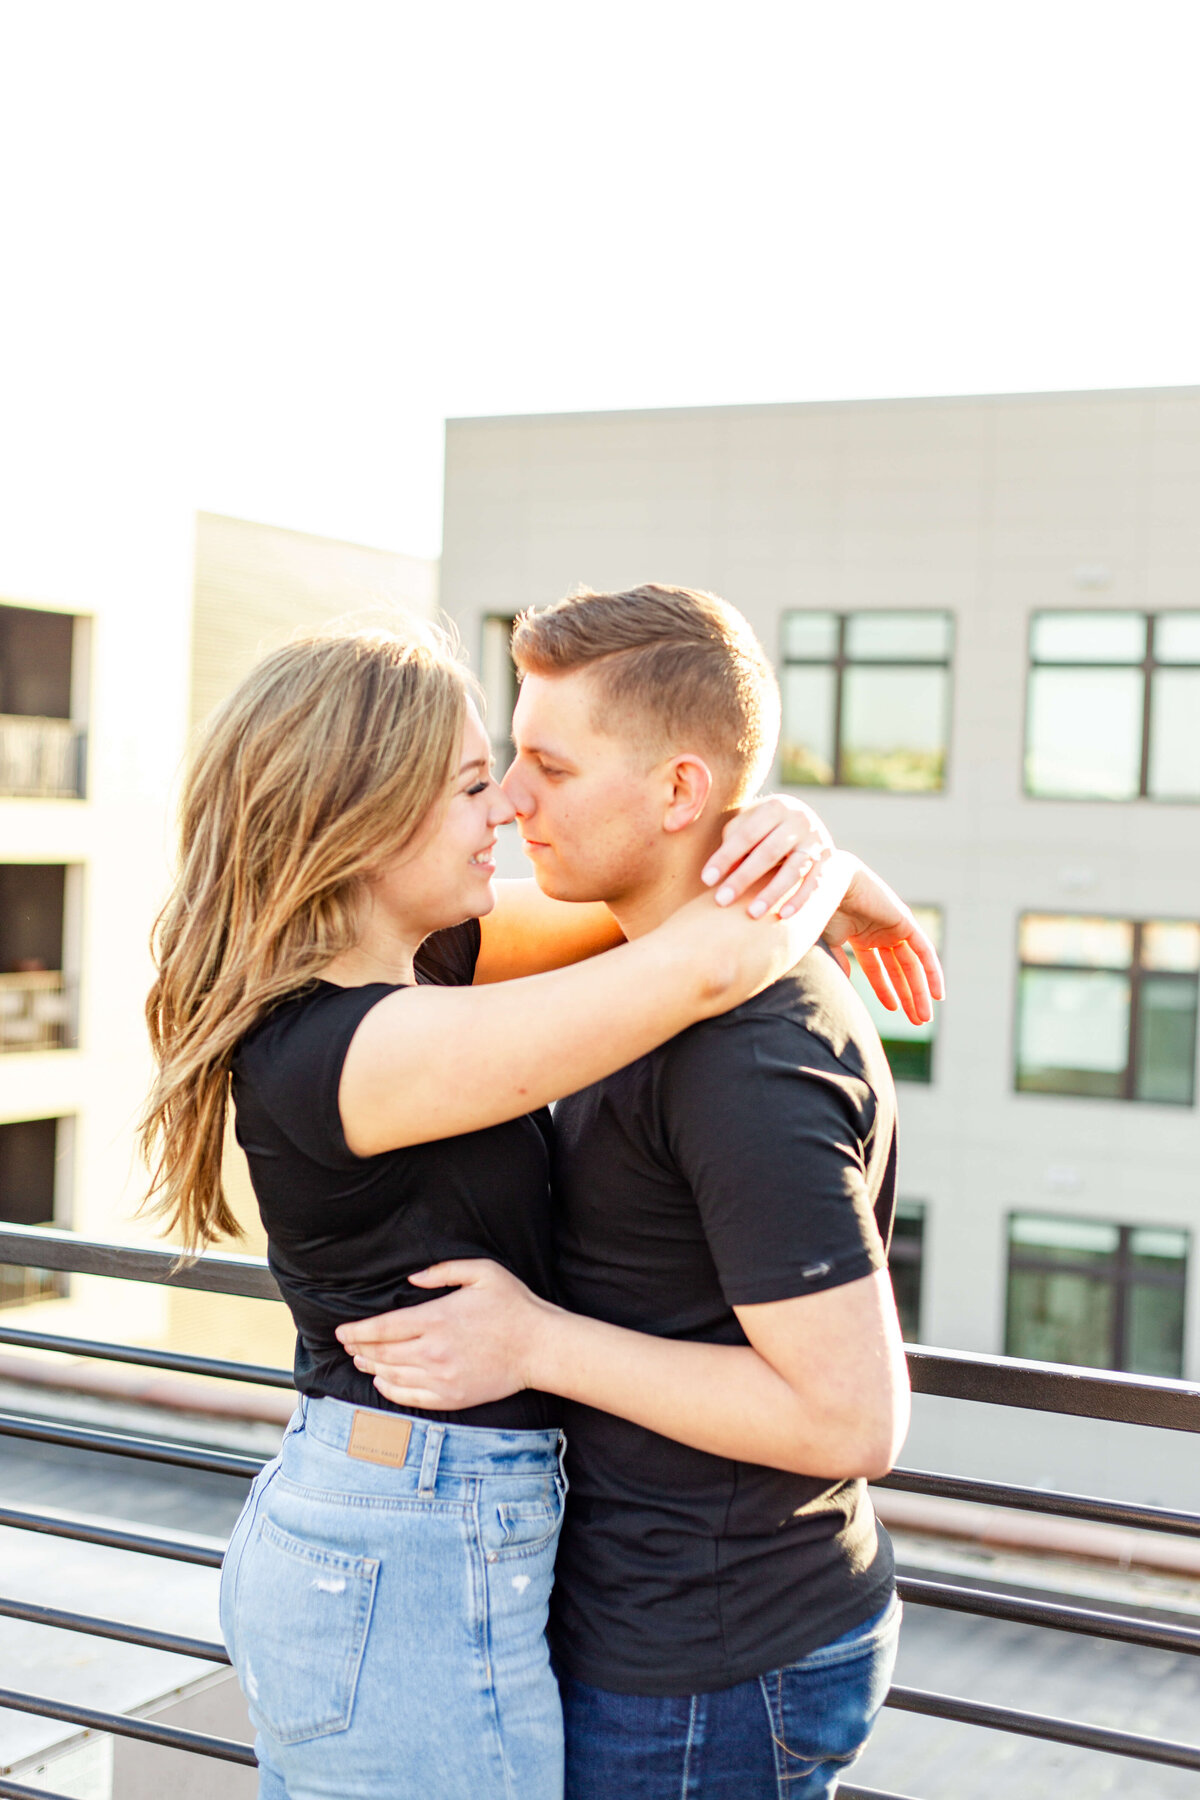 Rooftop-Engagement-Photo-Inspiration-in-Midwest-Bethany-Lane-Photography-3